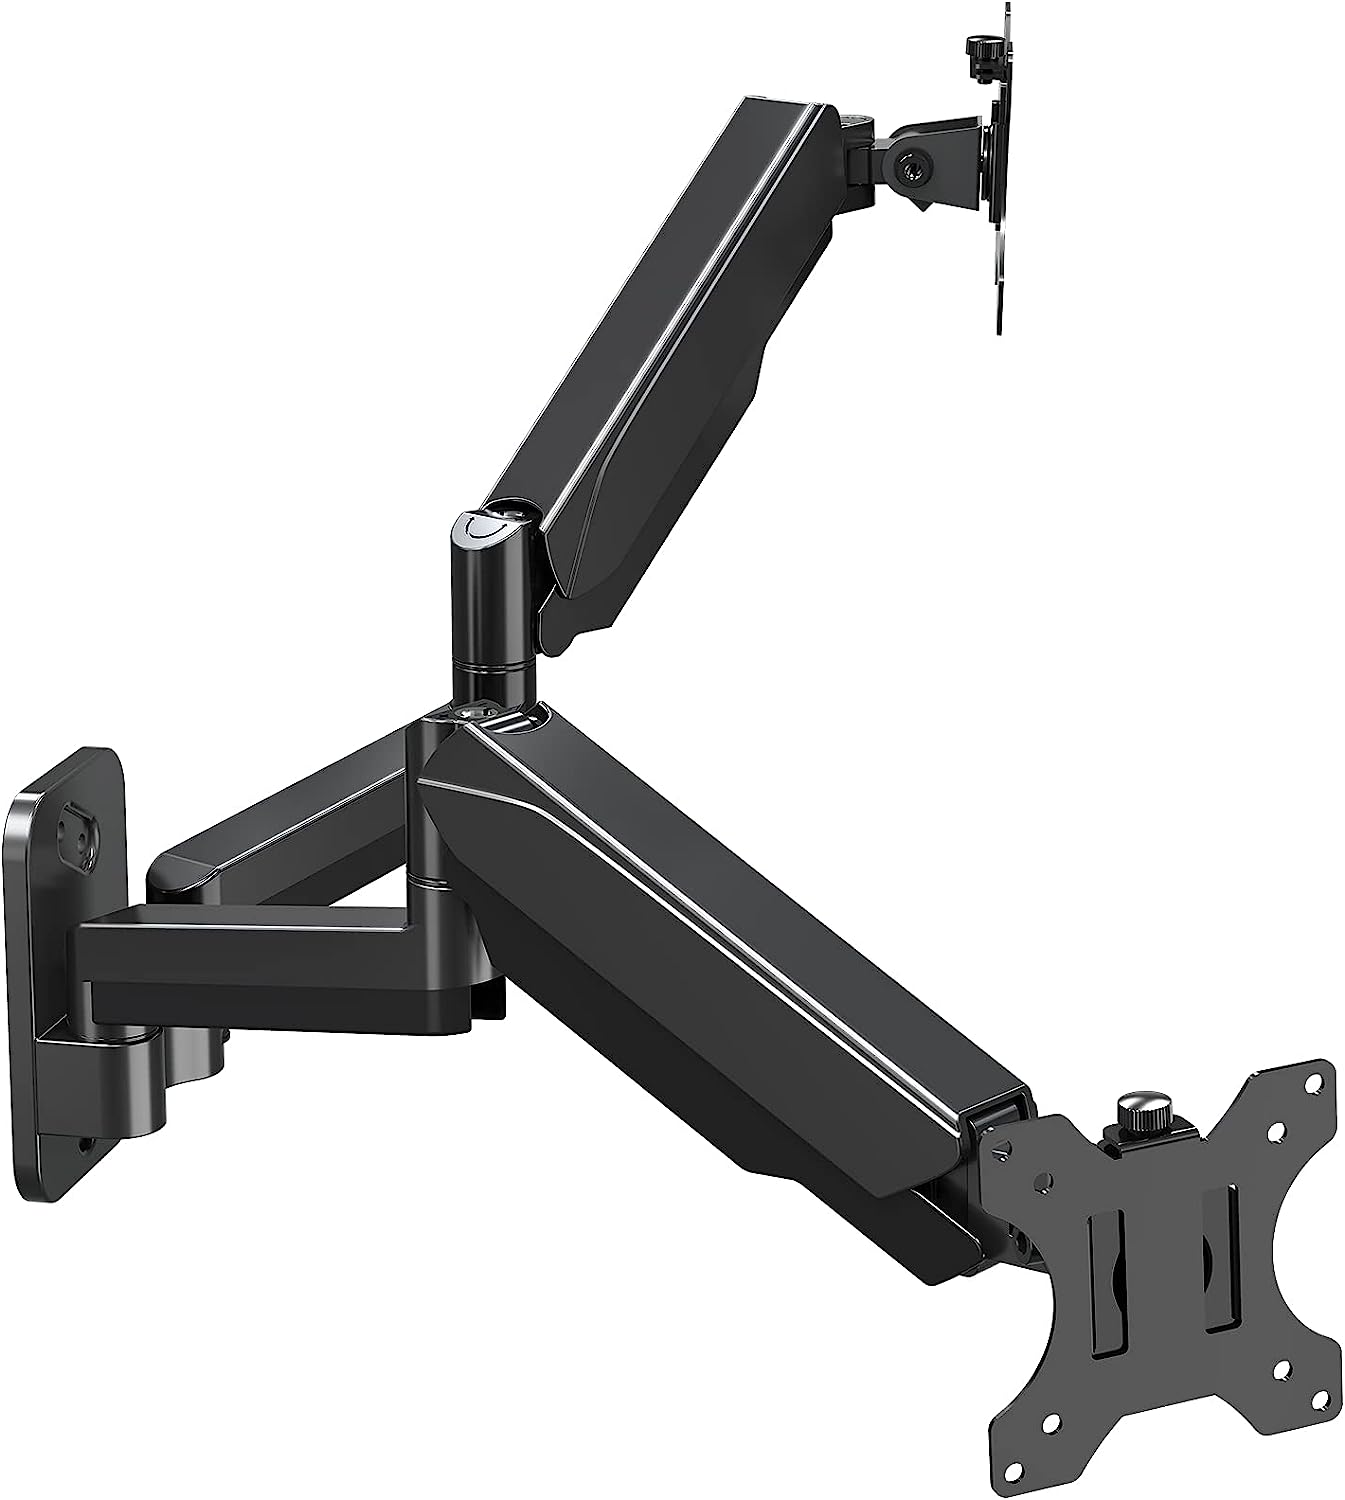 MOUNT PRO Dual Monitor Wall Mount for 13 to 32 Inch [...]